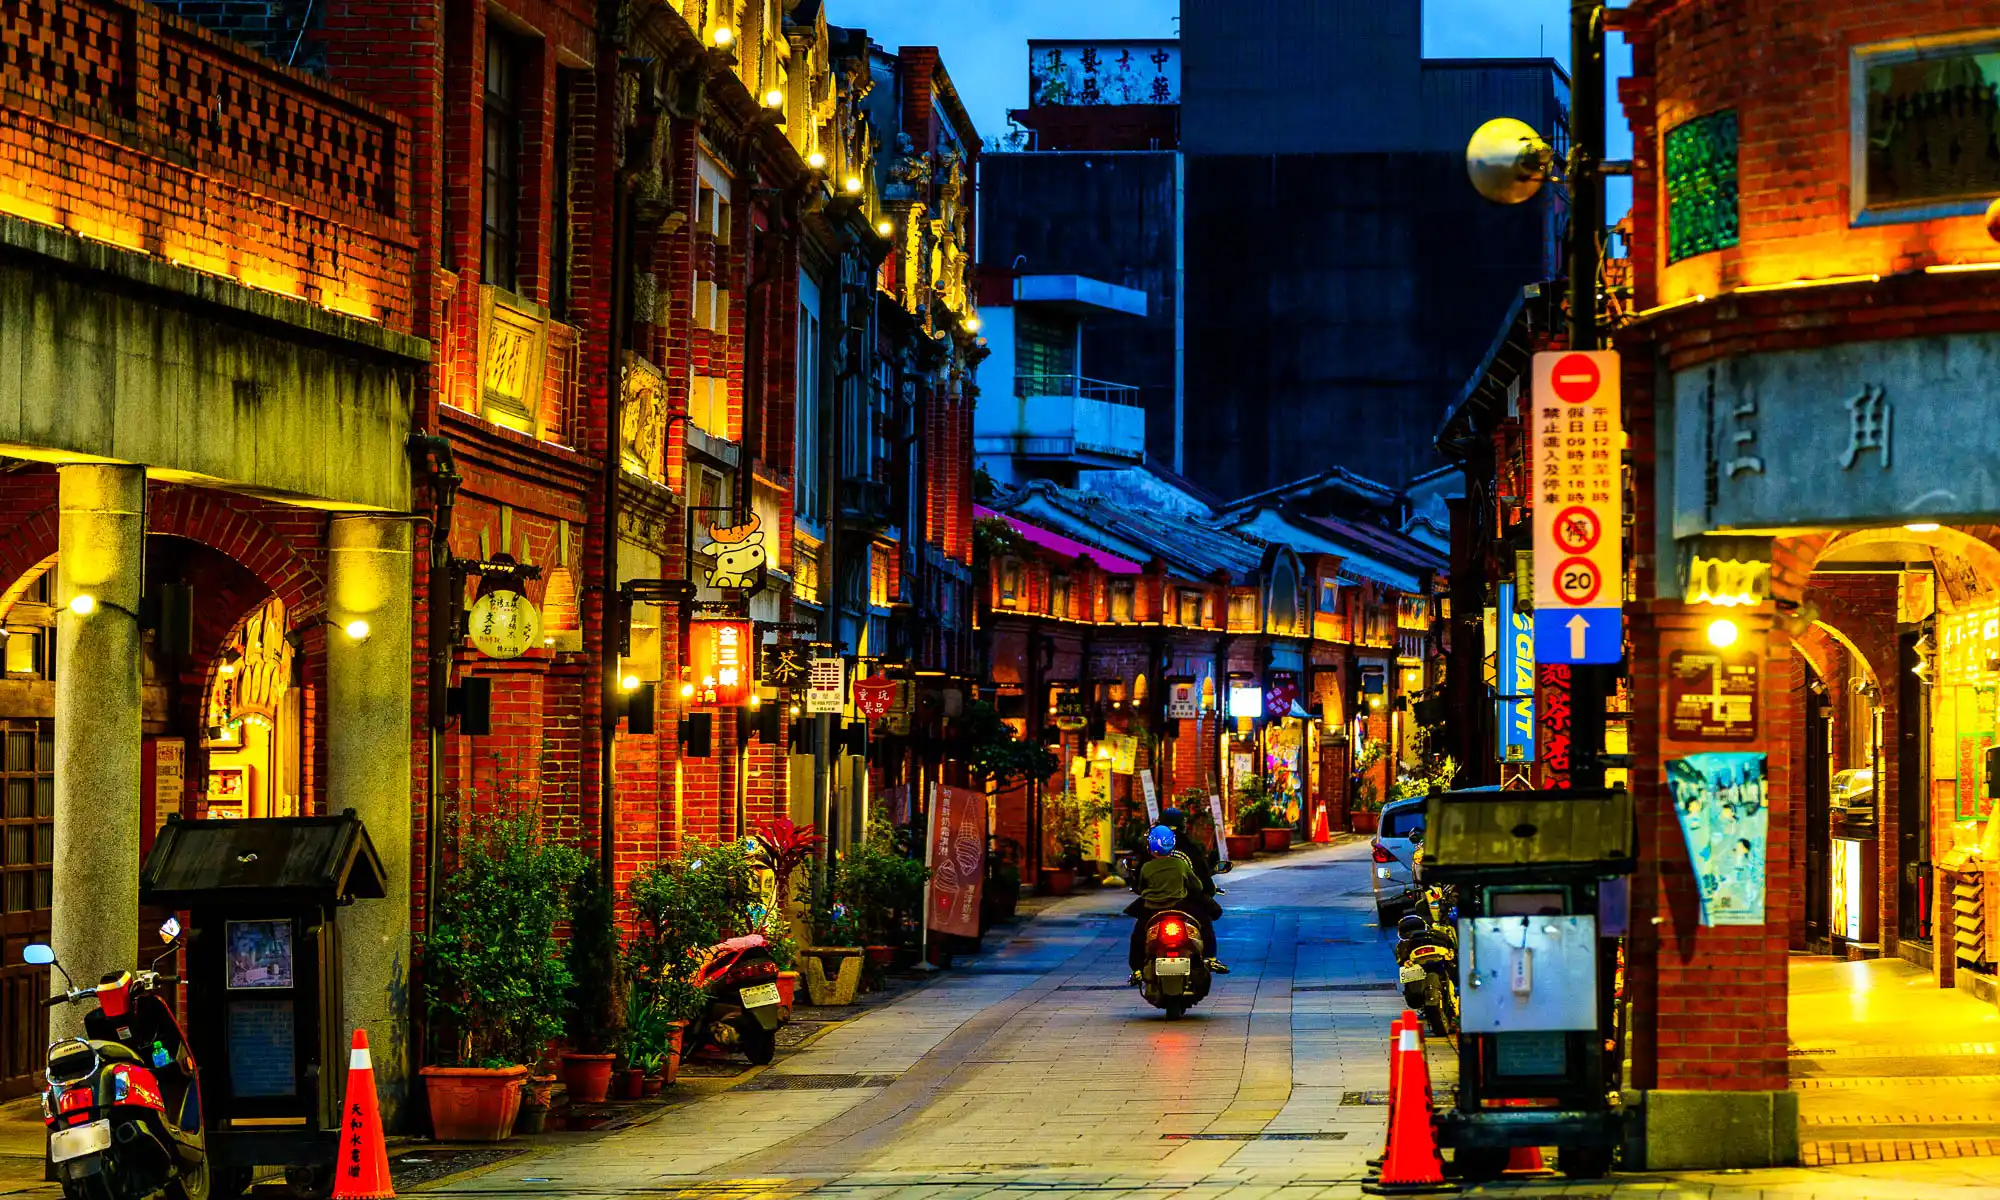 In the evening, the brick storefronts of Sanxia Old Street glow in the warm orange light of streetlamps.